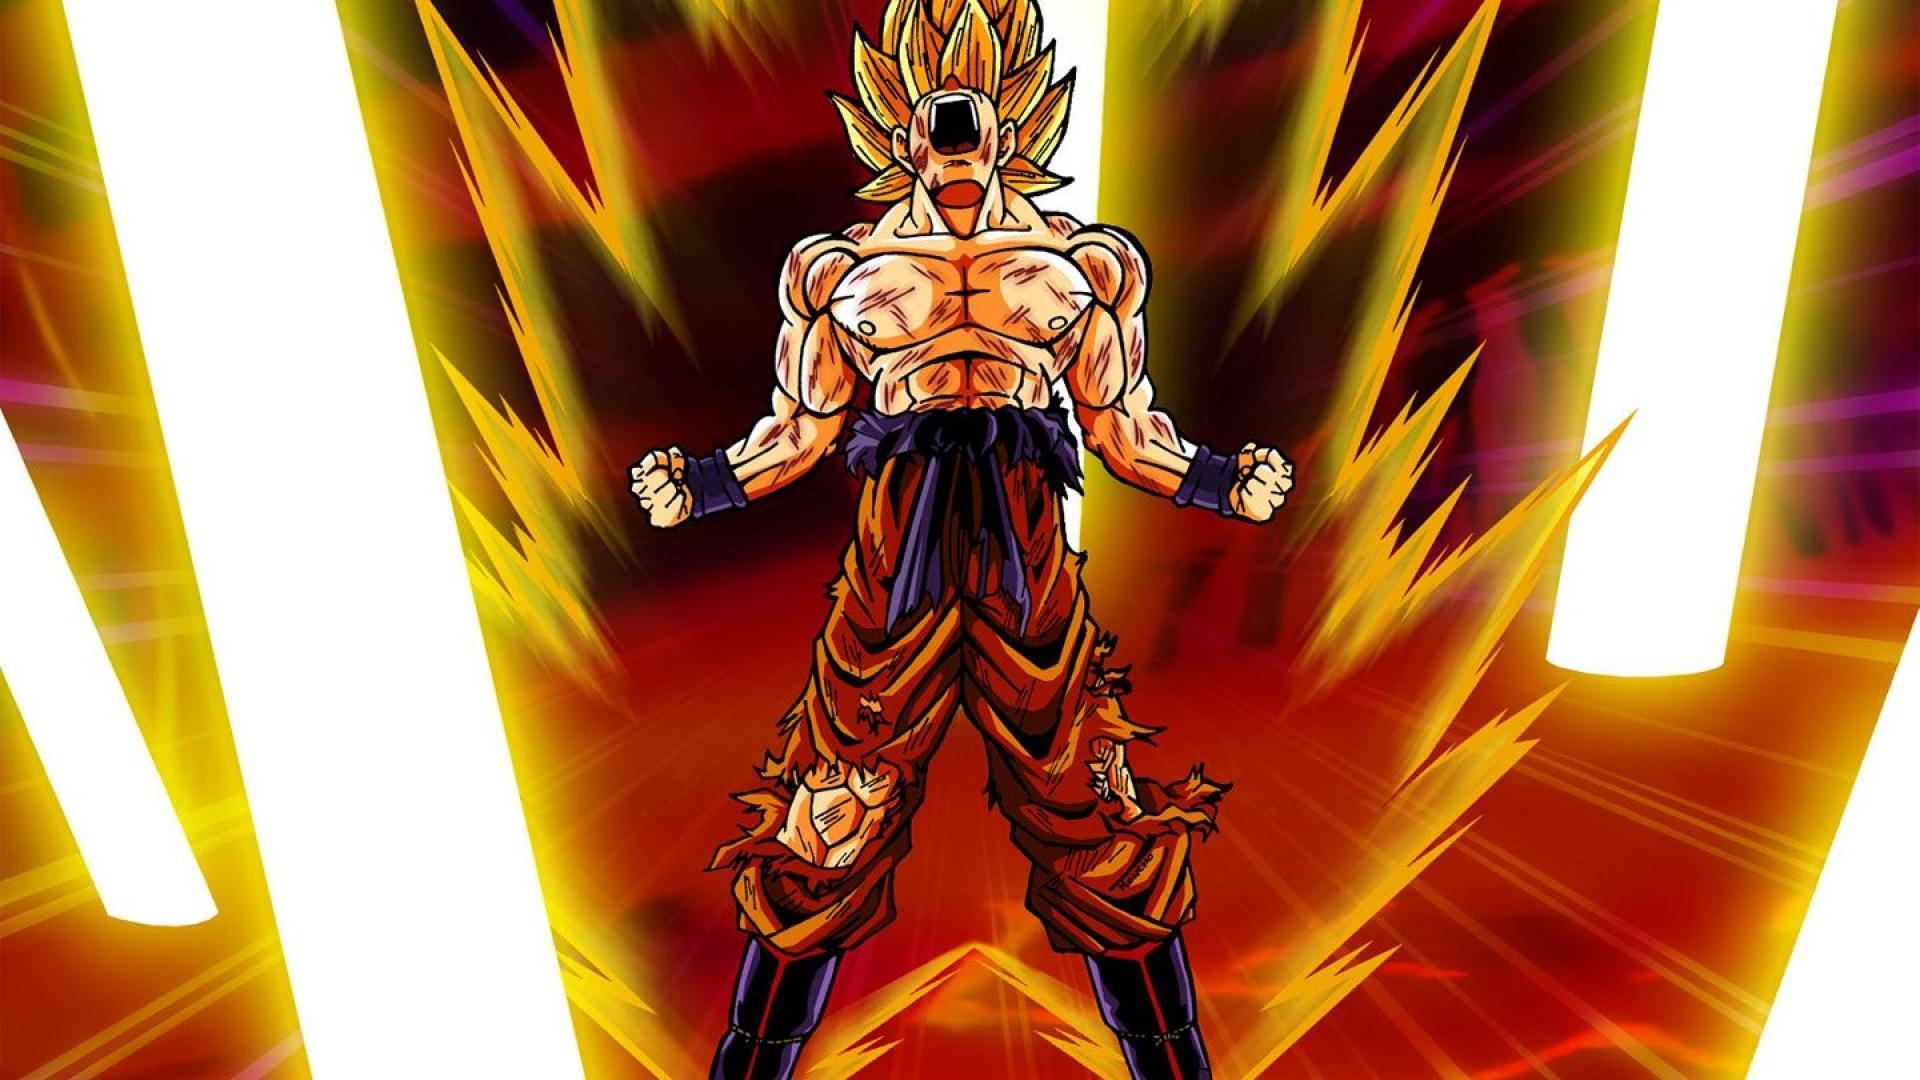 Angry This Person Dragon Ball Z Live Wallpaper Wonderful Decorative